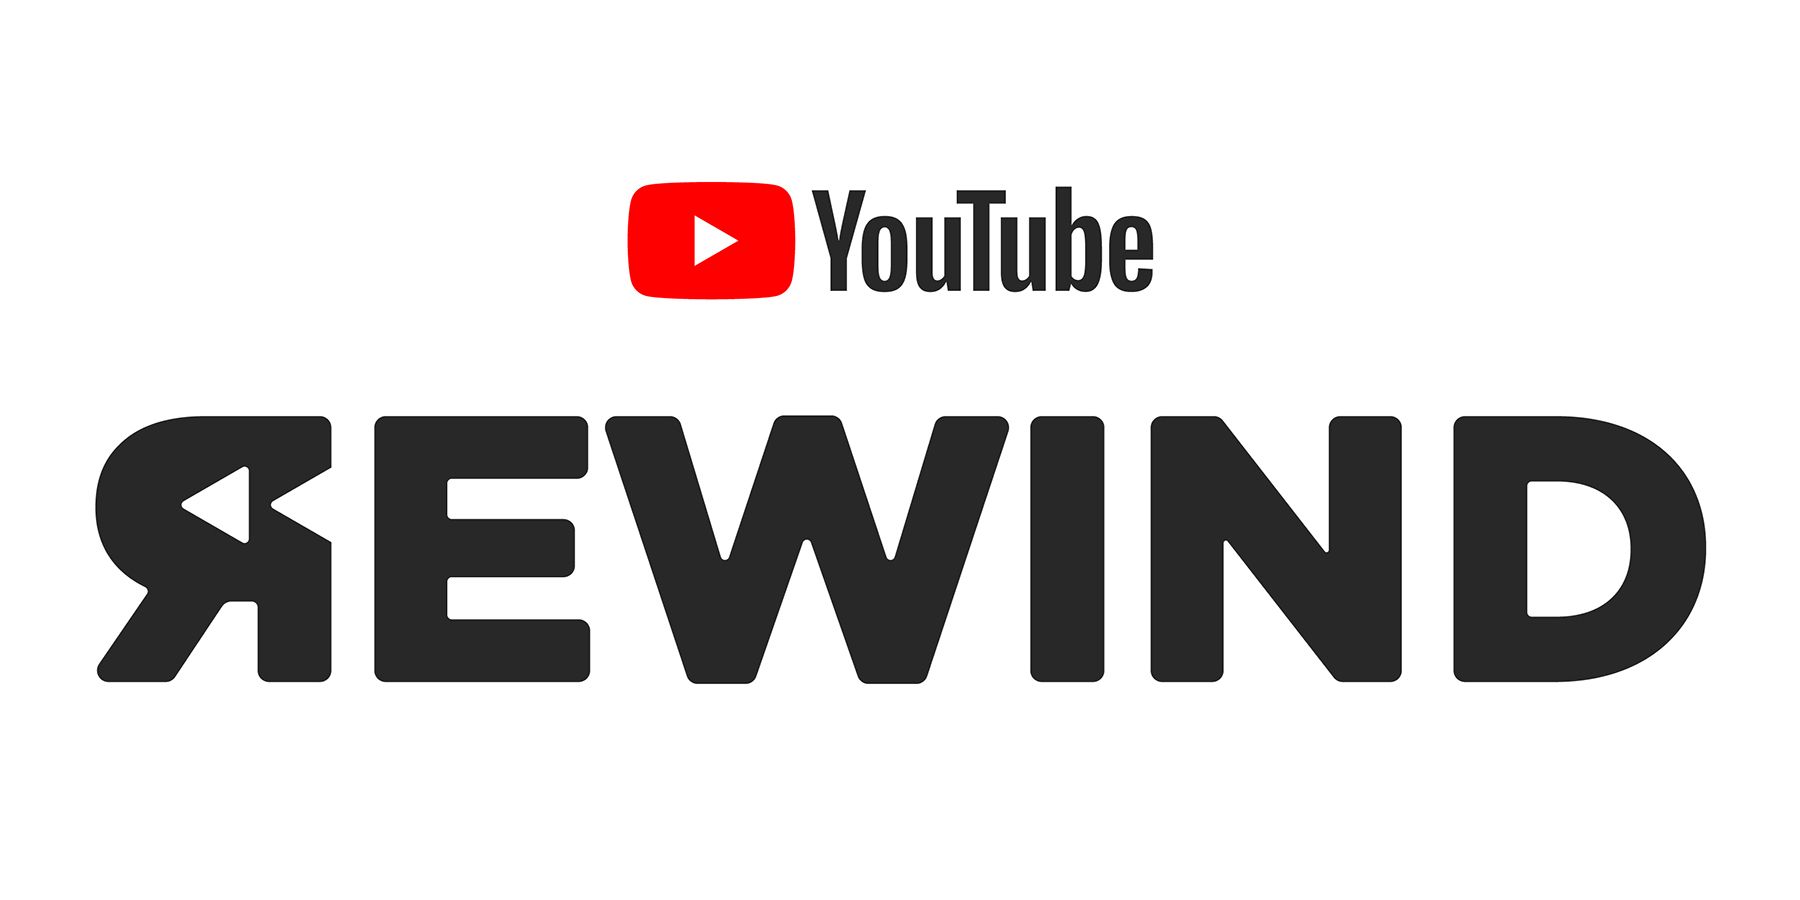 youtube rewind is canceled